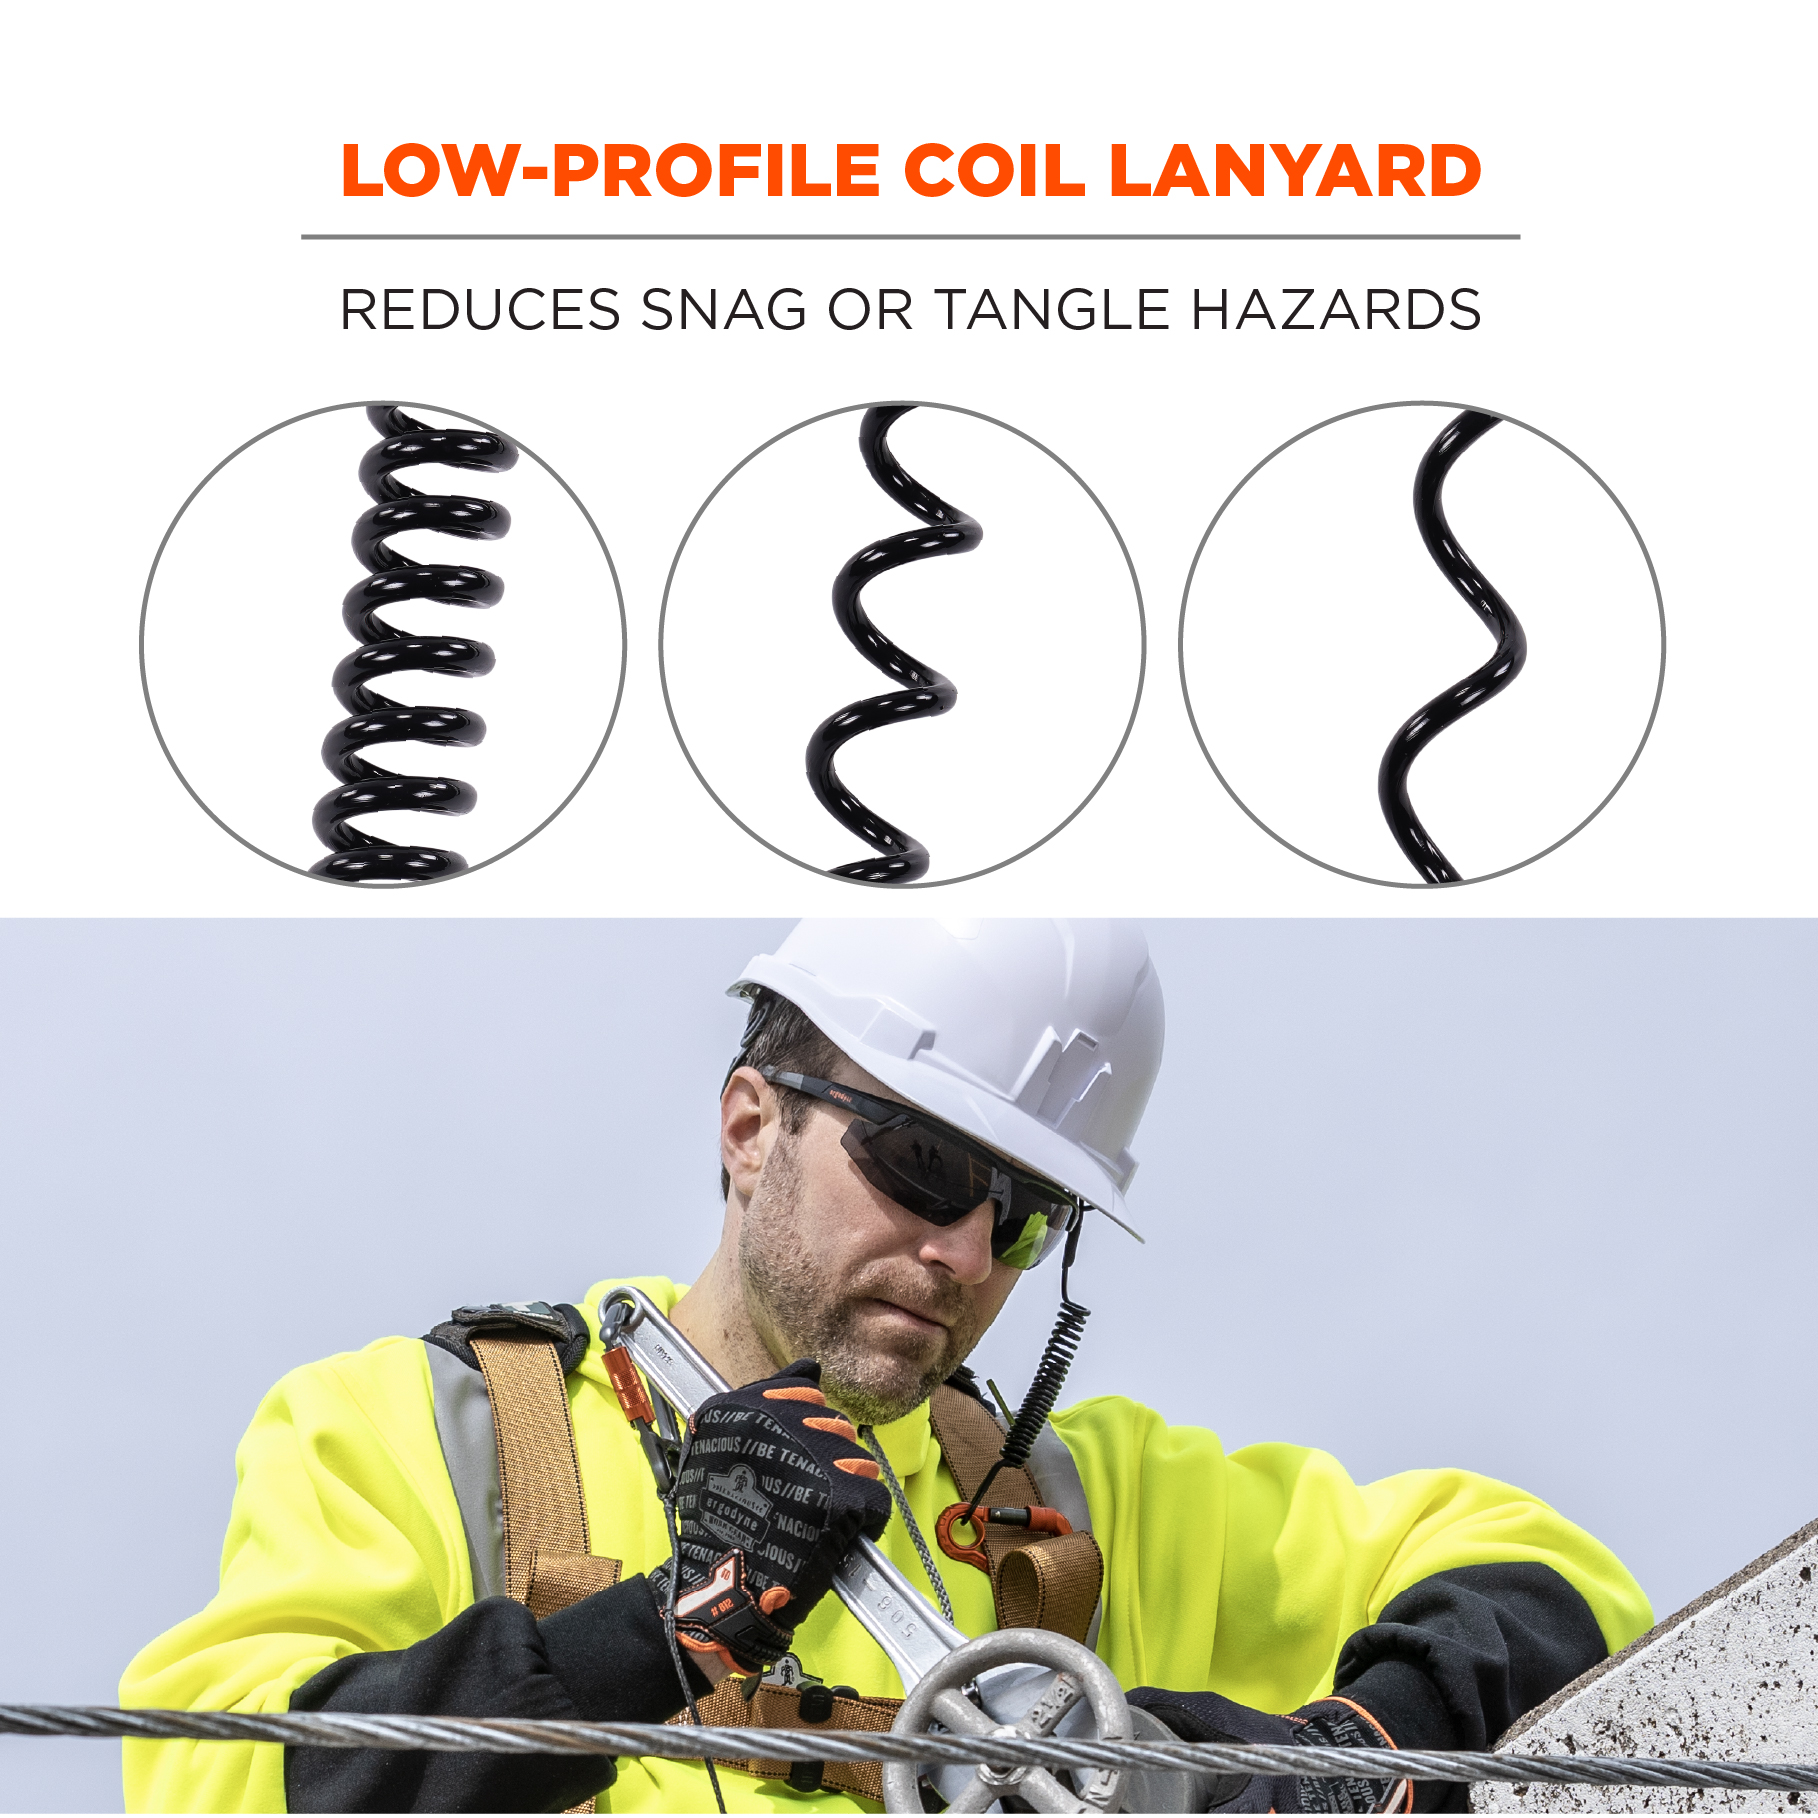 Adjustable Loop End Ultra-Durable Tough Scaffold Hard Hat Lanyard with Carabiner Construction 5PK Black 0925BS 3 Foot Safety Tool Lanyard Premium Quality Materials Ideal for Scaffold Tools 